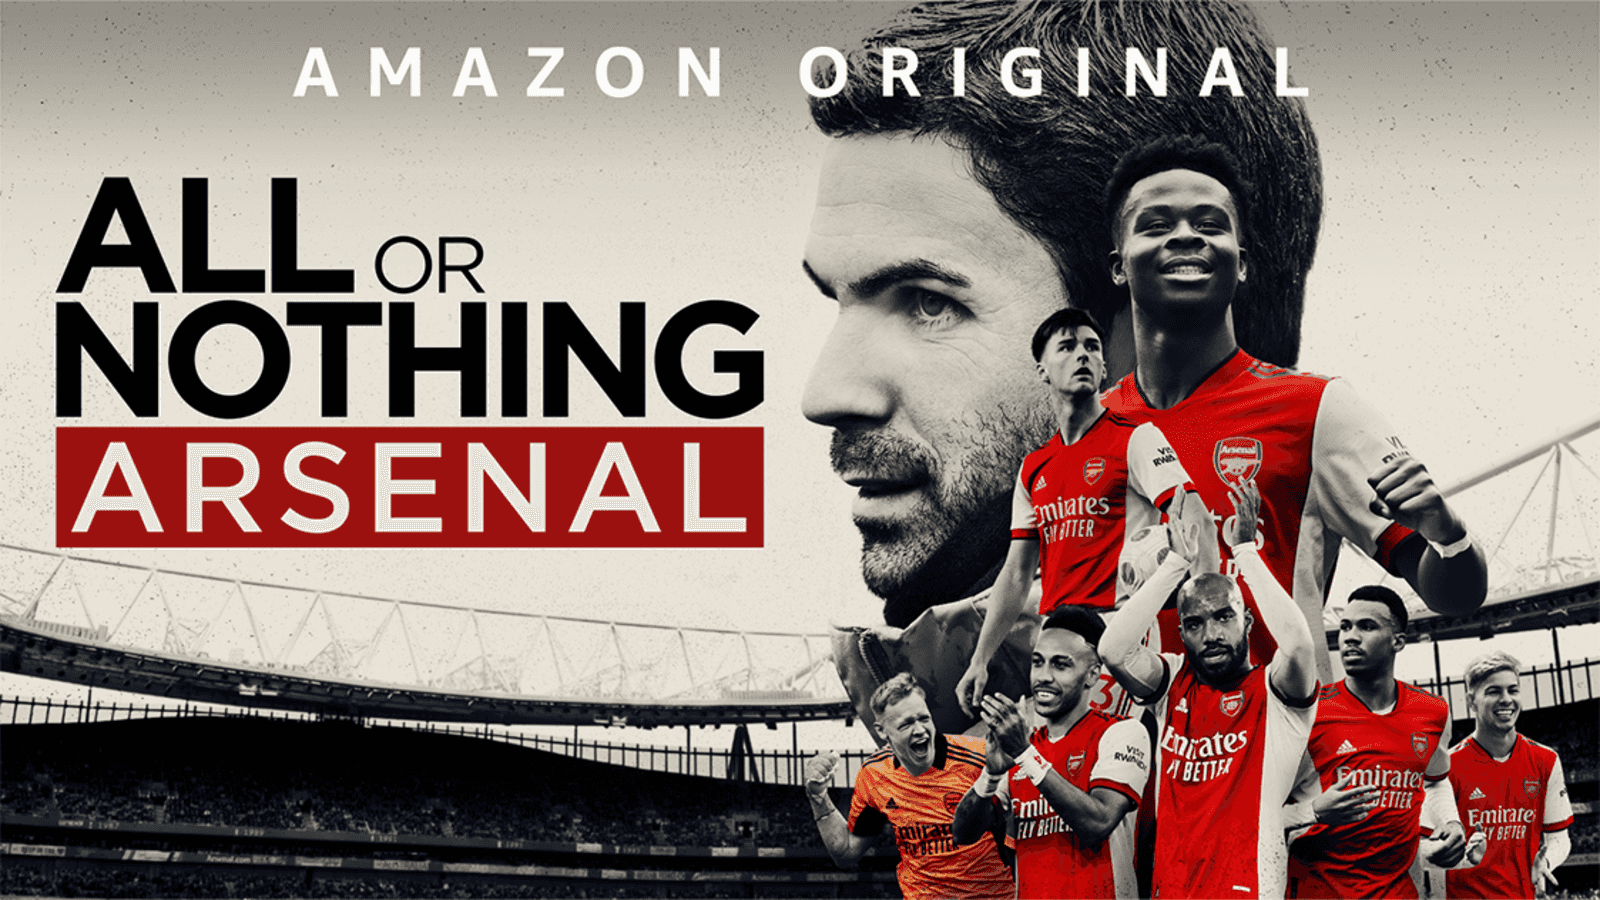 All or Nothing Arsenal documentary Arsenal 'All or Nothing' trailer